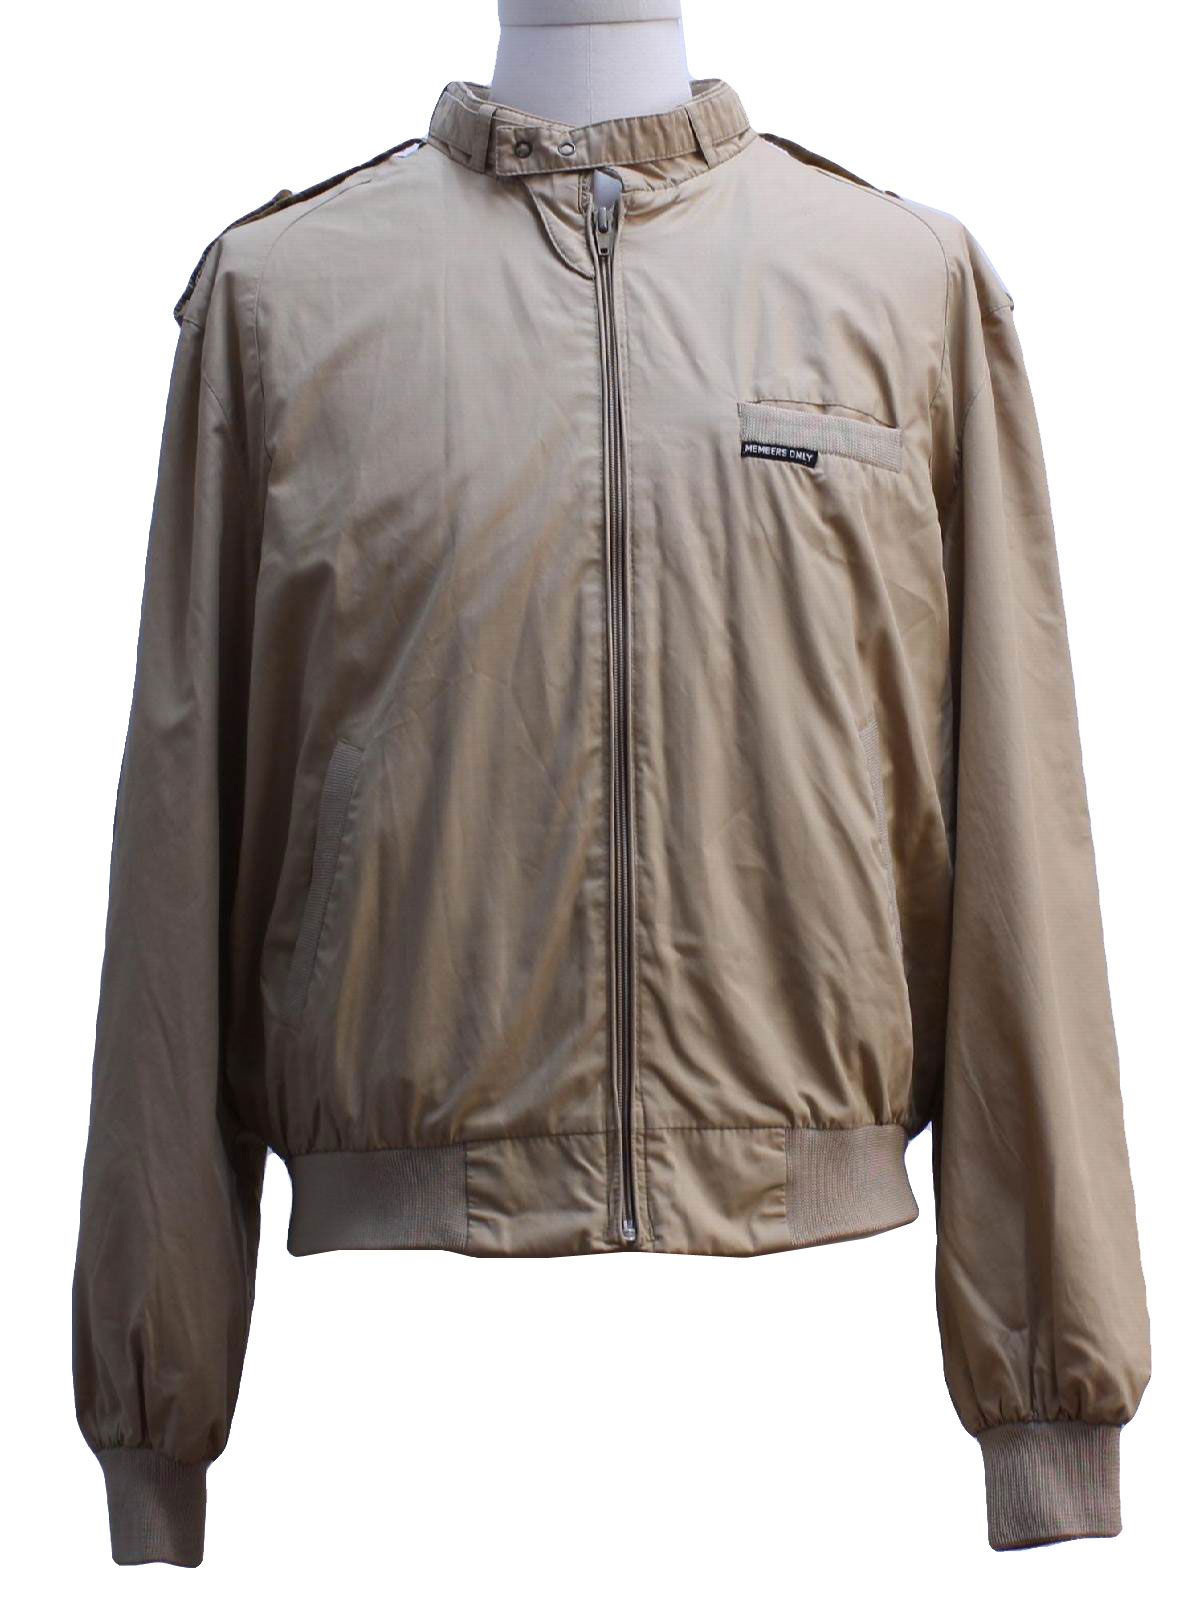 Retro Eighties Jacket: 80s -Members Only- Mens light tan cotton and ...